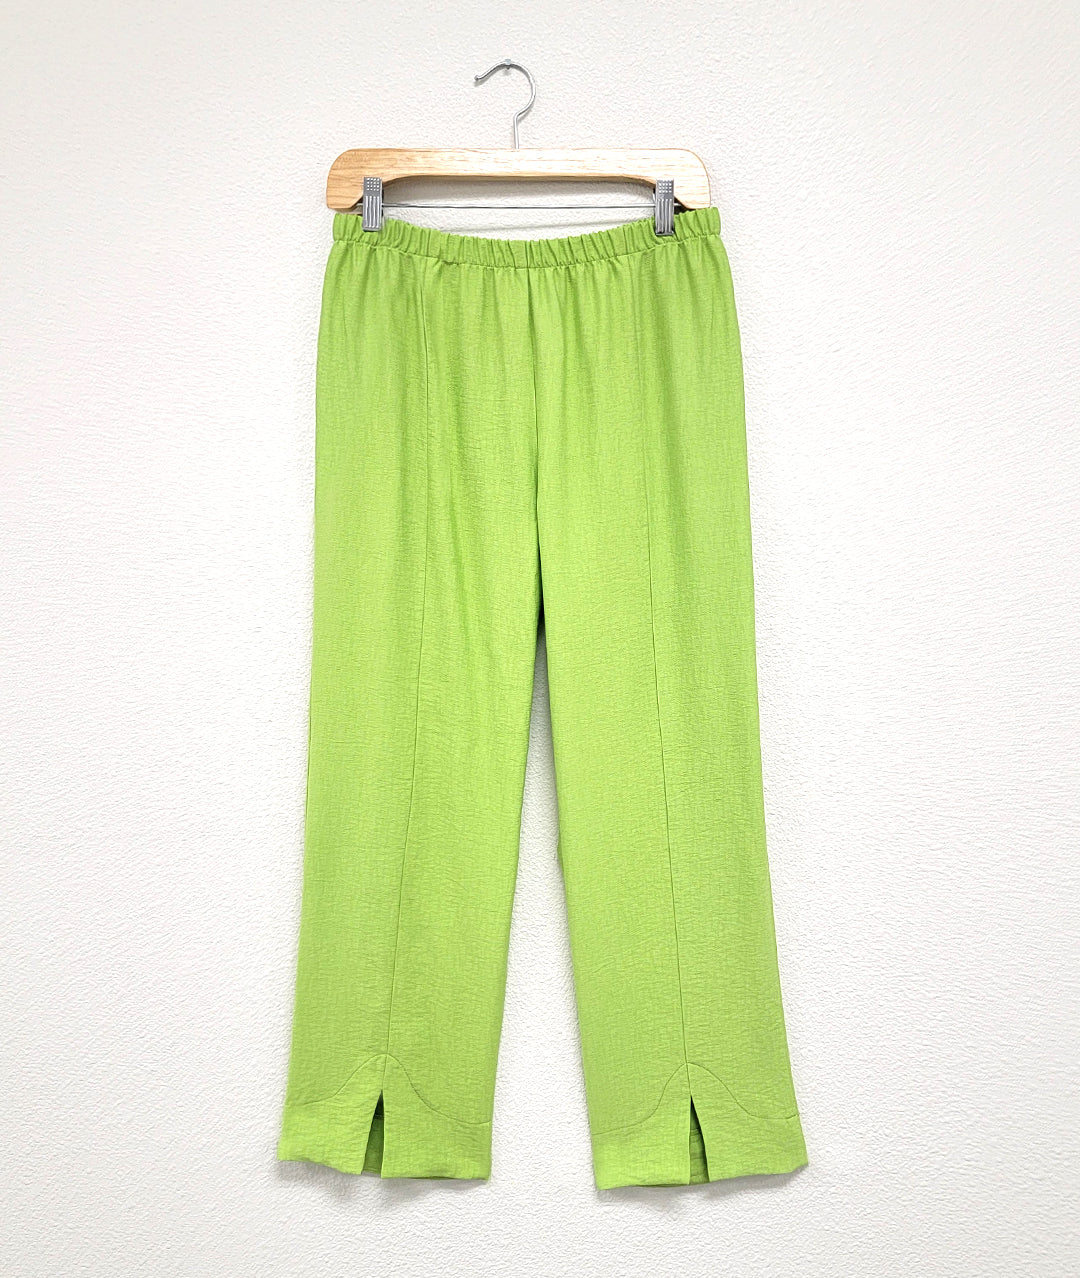 lime green straight leg pant. Tapered leg ankle pant with center front seam and small slit at hem. Full elastic waist.